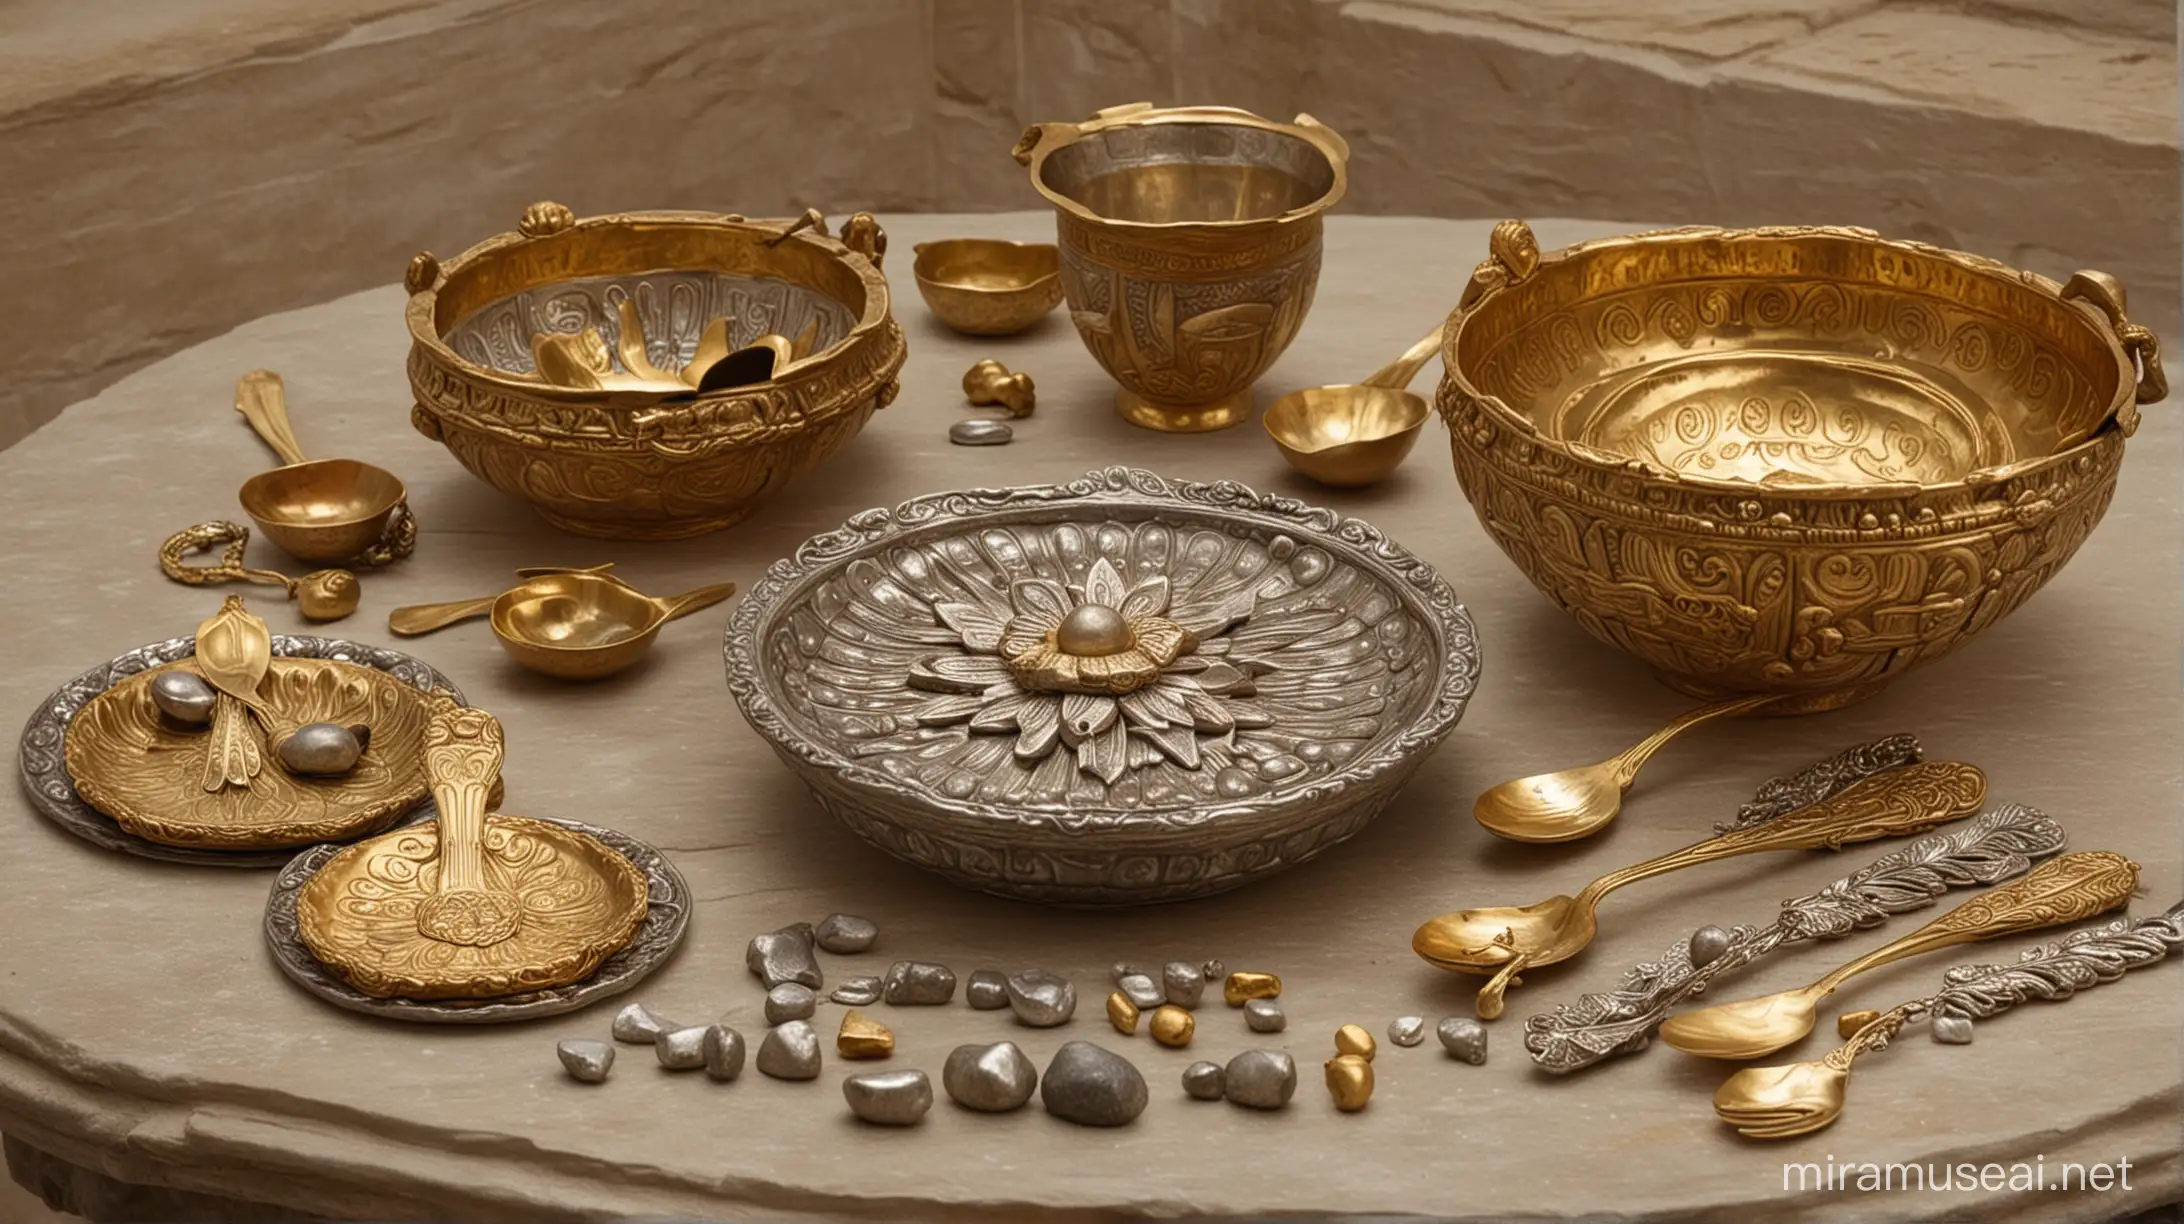 Ornate Stone Altar and GoldSilver Utensils in Ancient Jewish Temple Setting